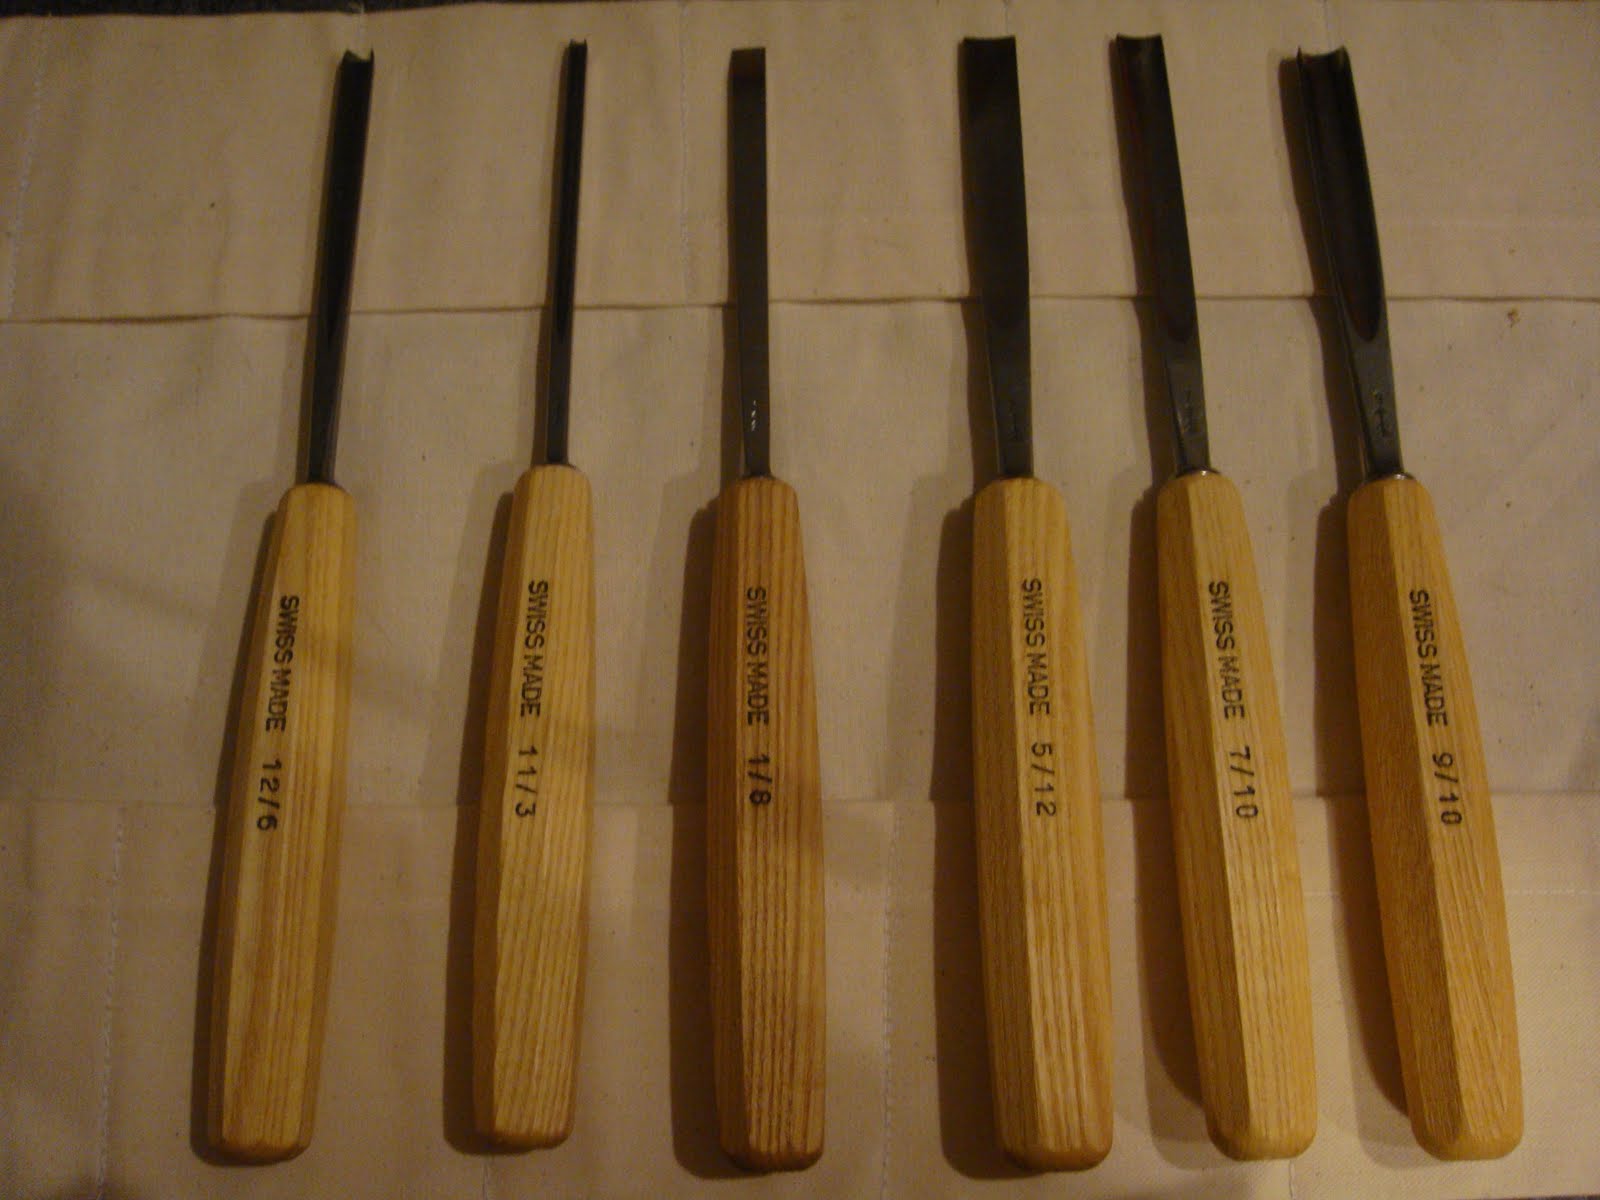 posts related to pfeil wood carving tools uk wood carving